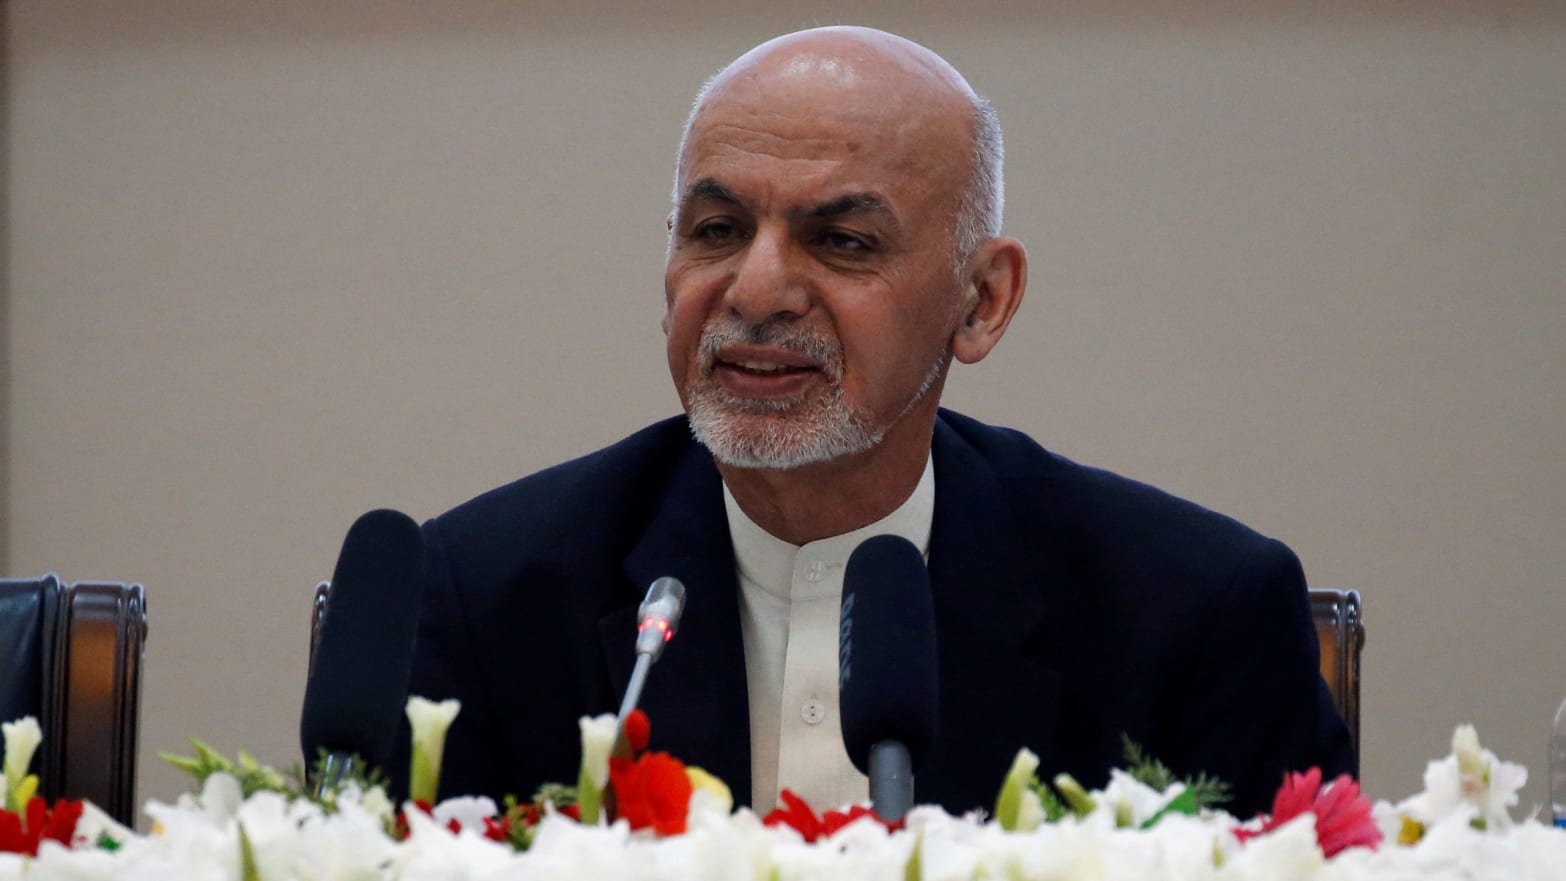 Afghan President Ashraf Ghani speaks during during a peace and security cooperation conference in Kabul, Afghanistan on February 28, 2018.